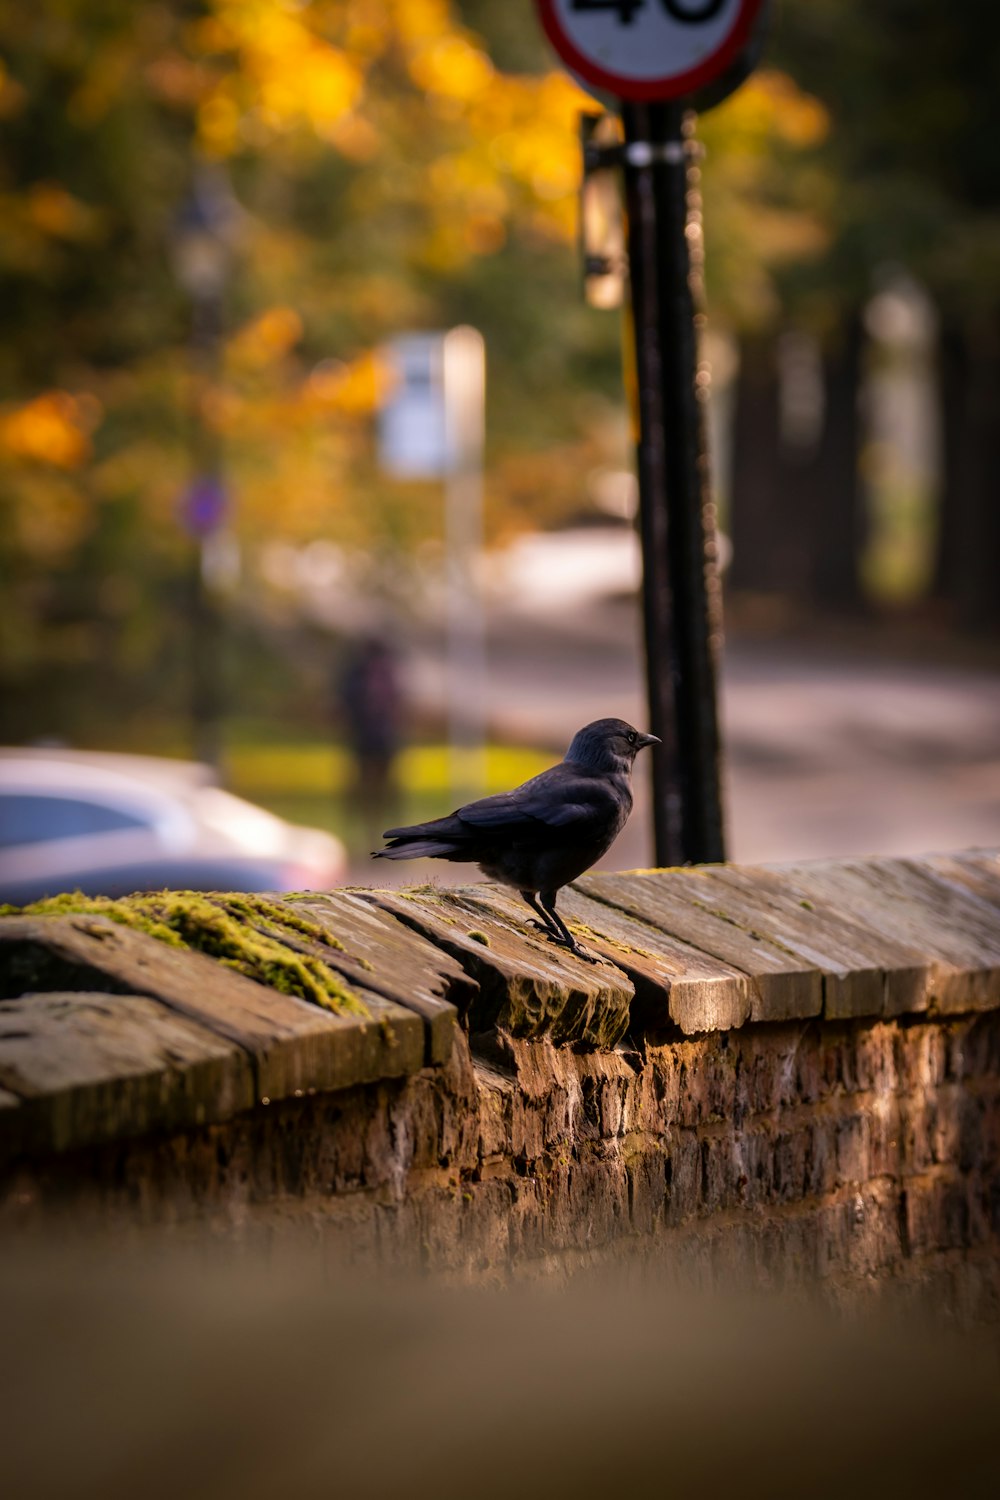 a black bird sitting on a wooden ledge next to a street sign